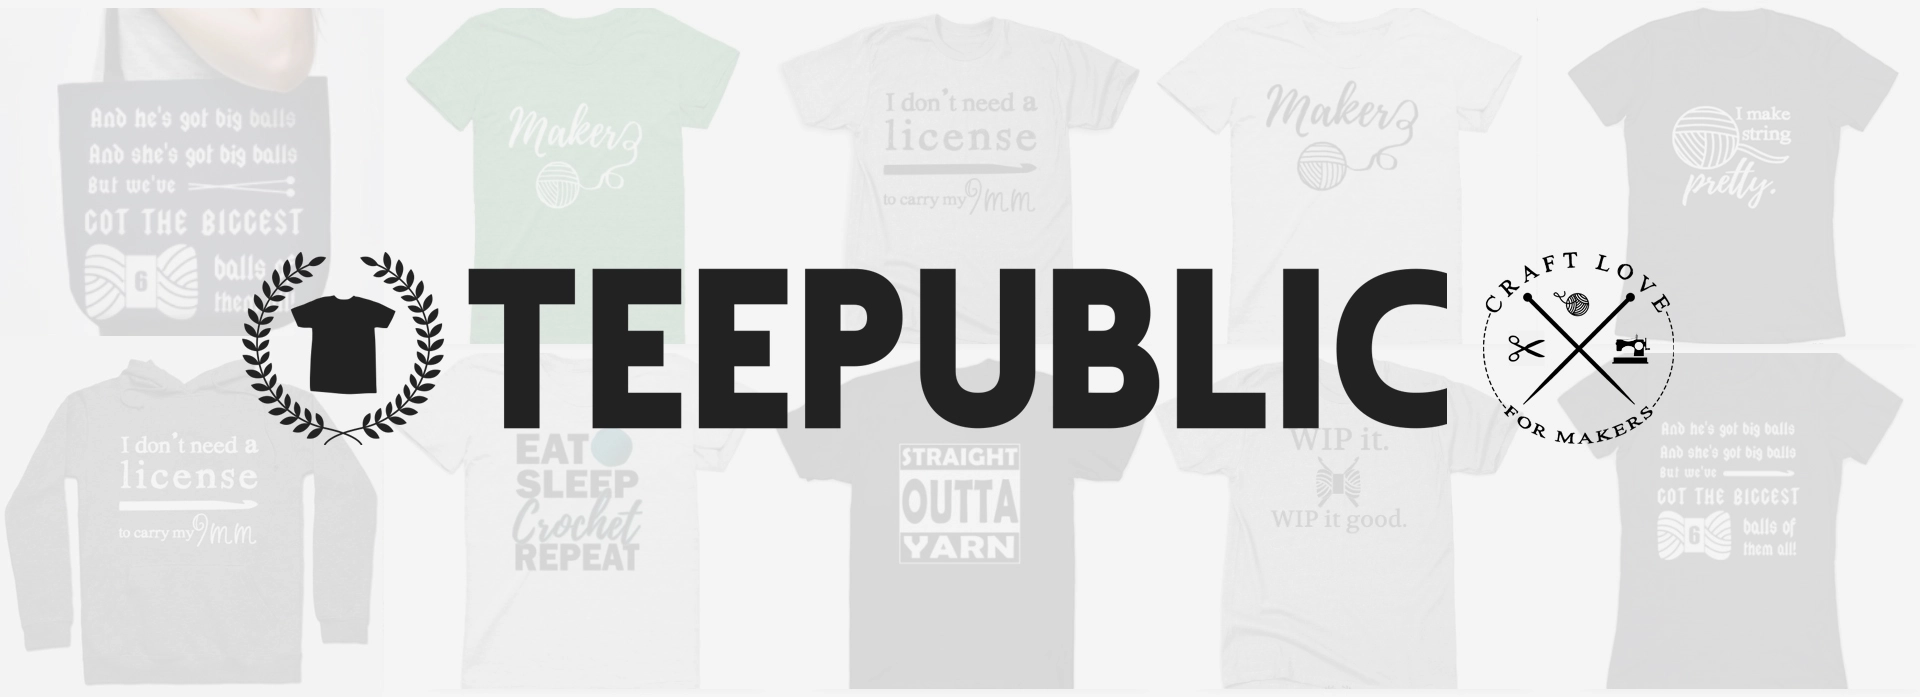 Shop quality designs just for makers and craft lovers on Teepublic by #shopcraftlove